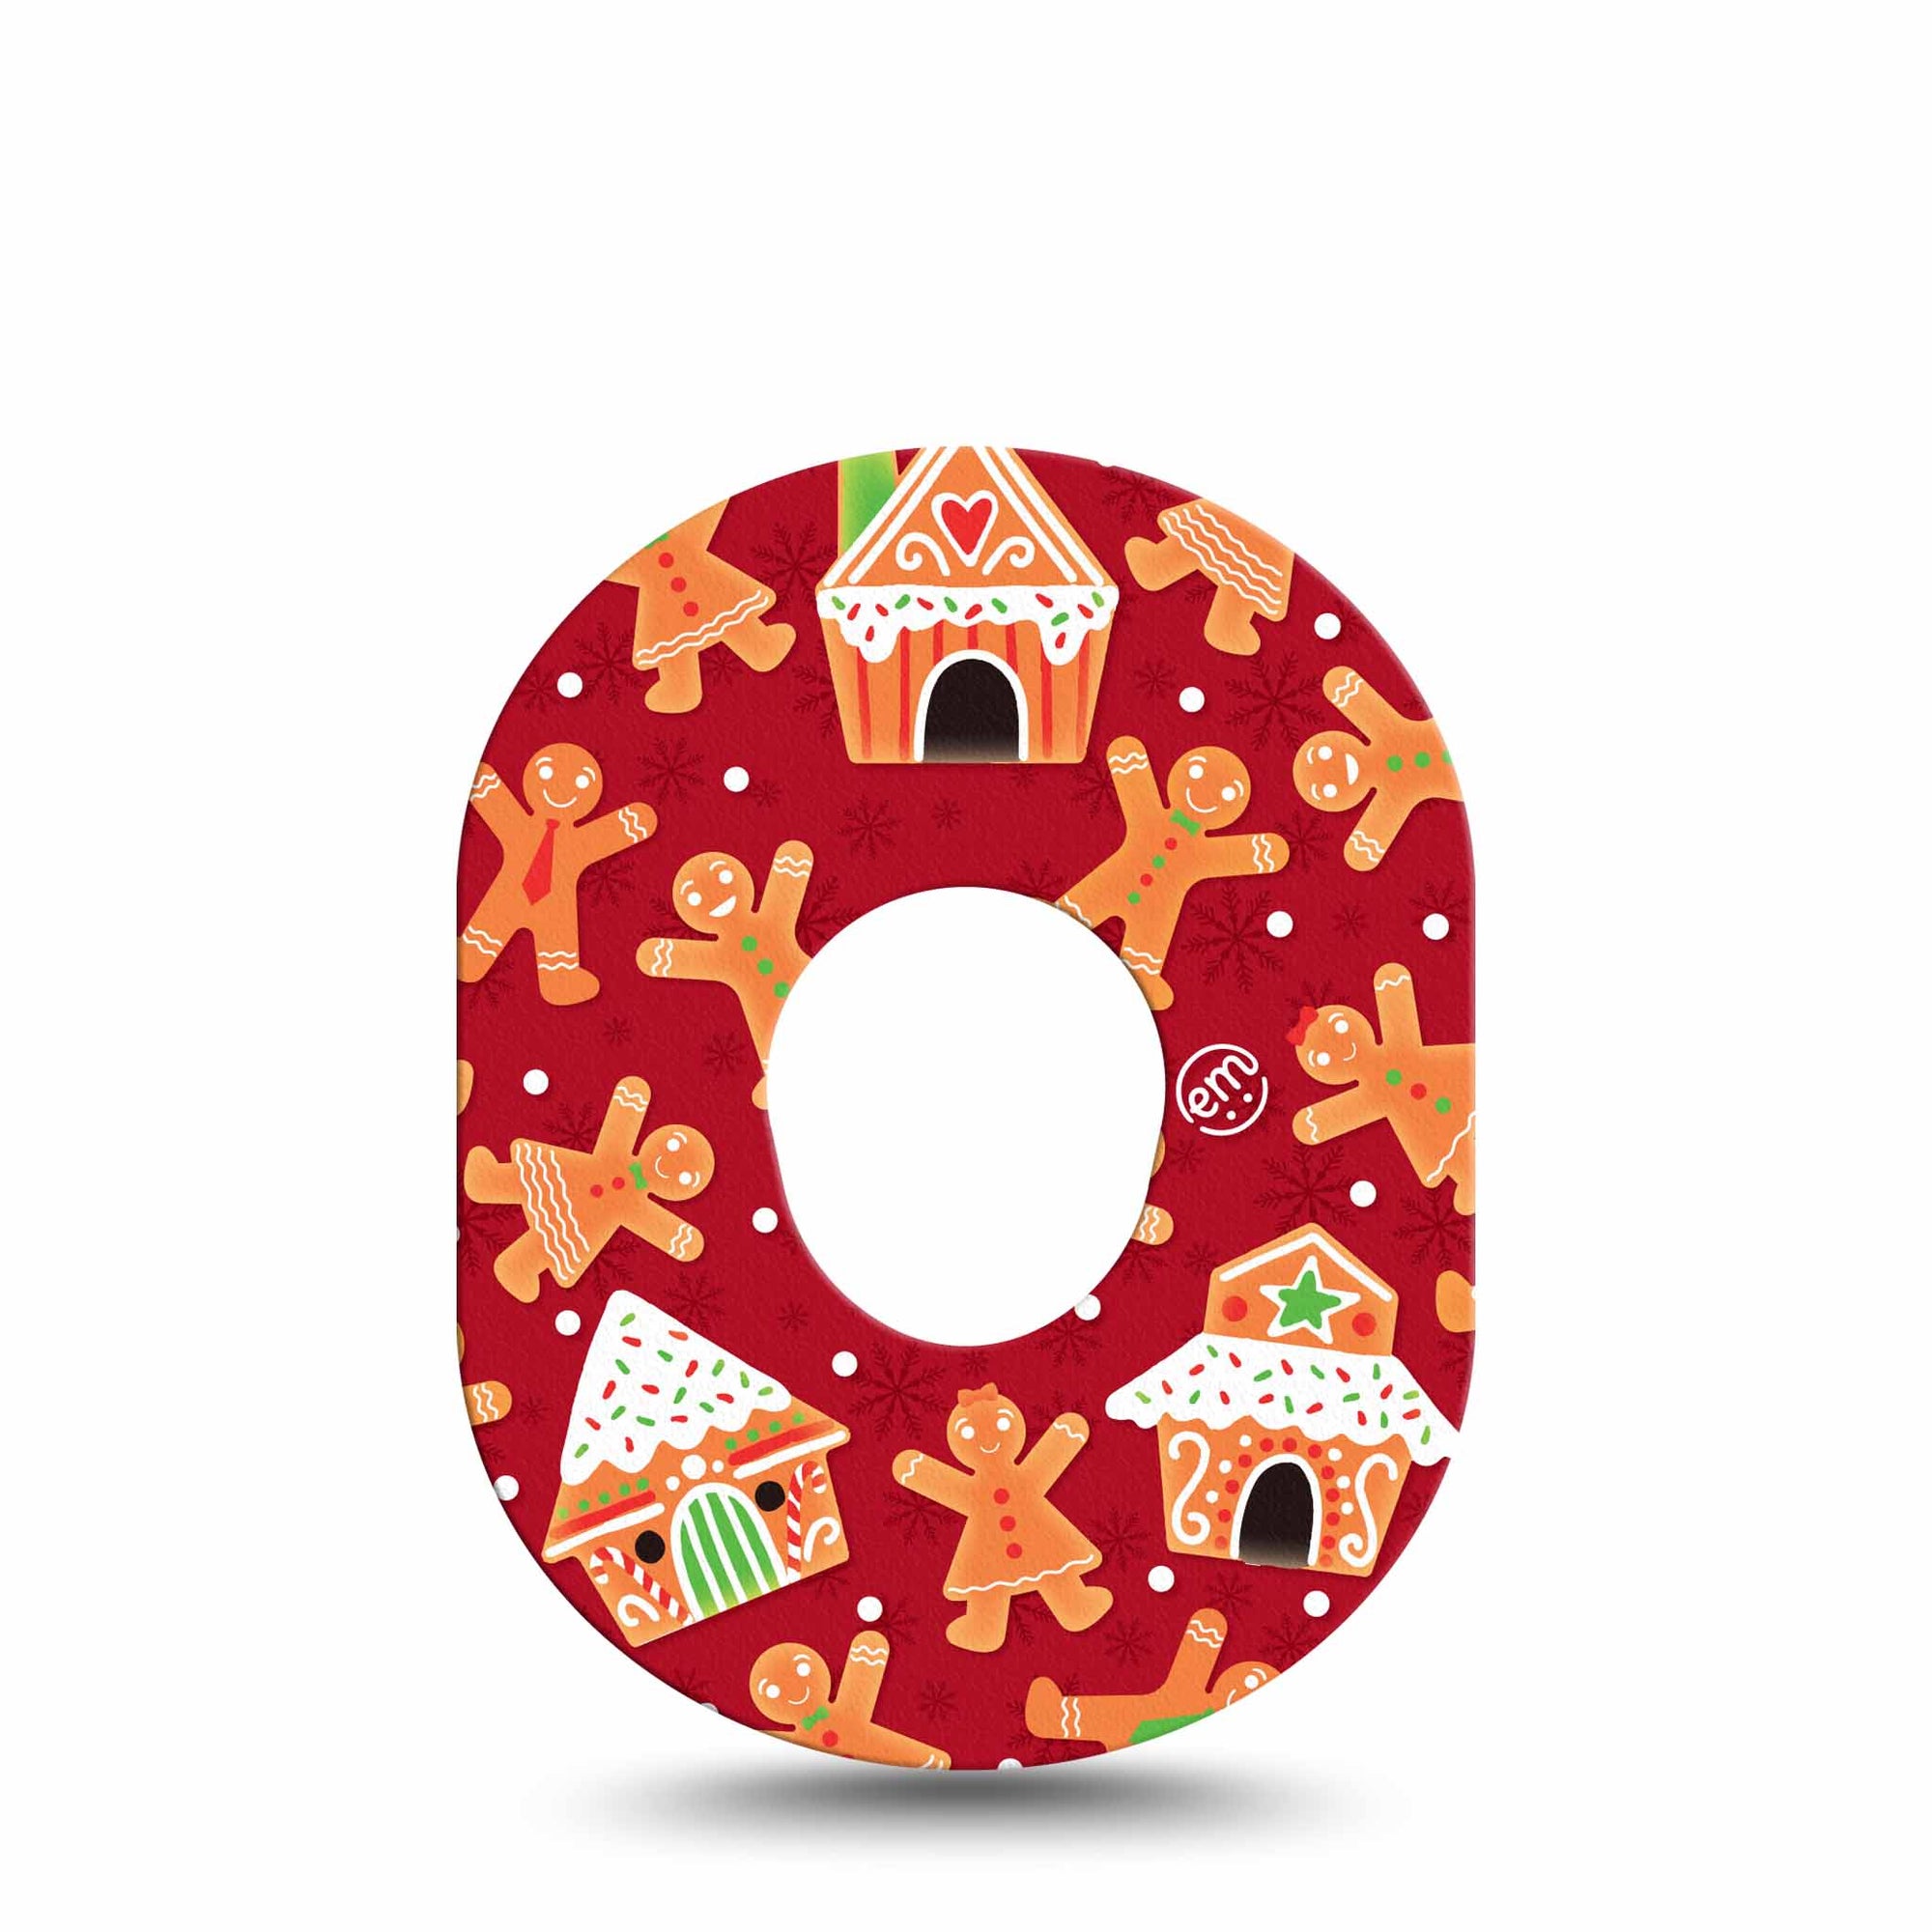 ExpressionMed Gingerbread Fun Dexcom G7 Patch, Single, Christmas themed CGM adhesive Tape design